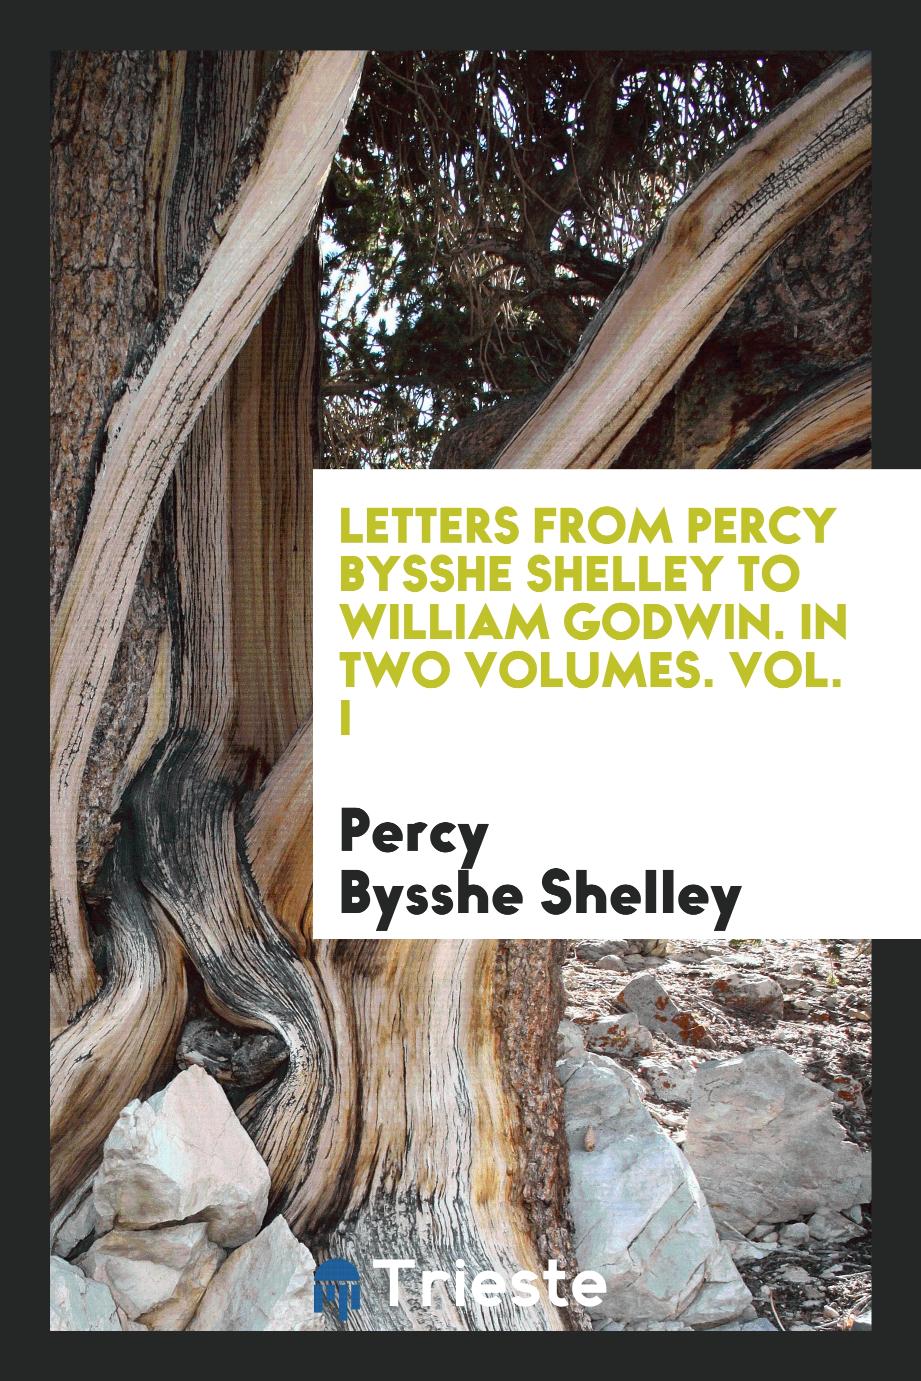 Letters from Percy Bysshe Shelley to William Godwin. In two Volumes. Vol. I